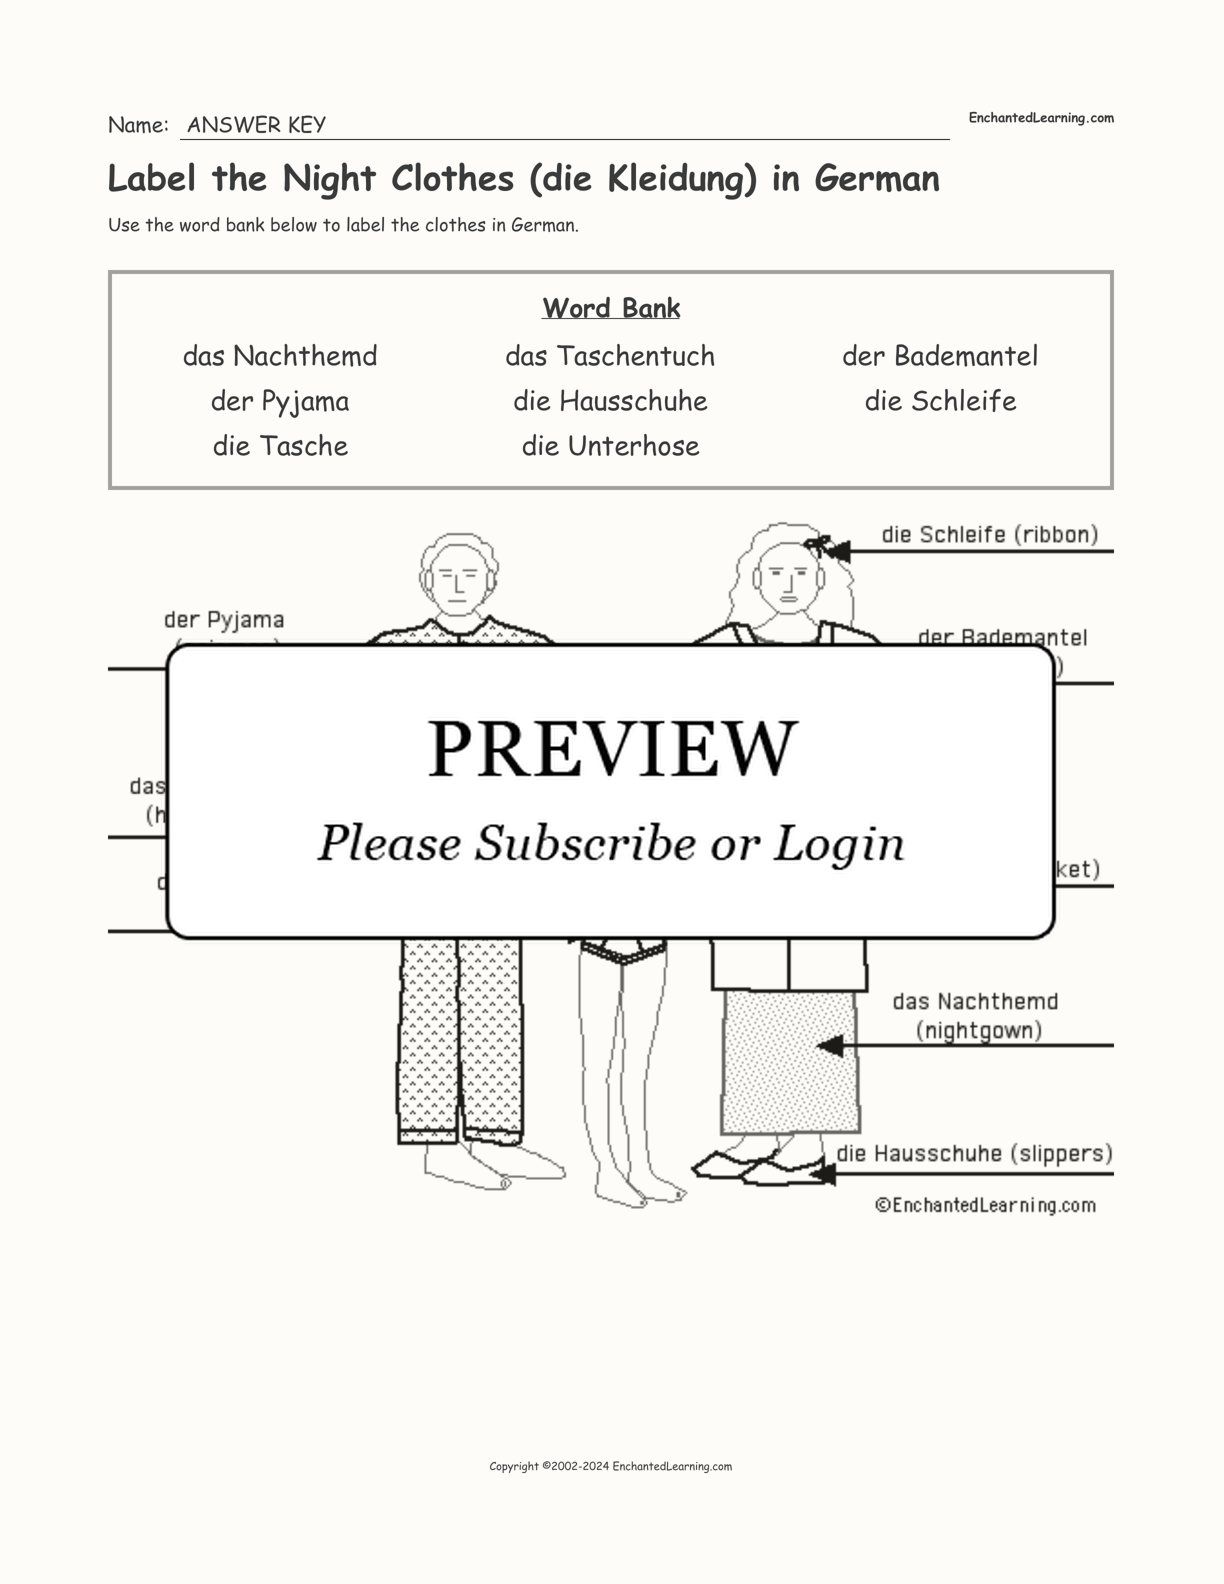 Label the Night Clothes (die Kleidung) in German interactive worksheet page 2